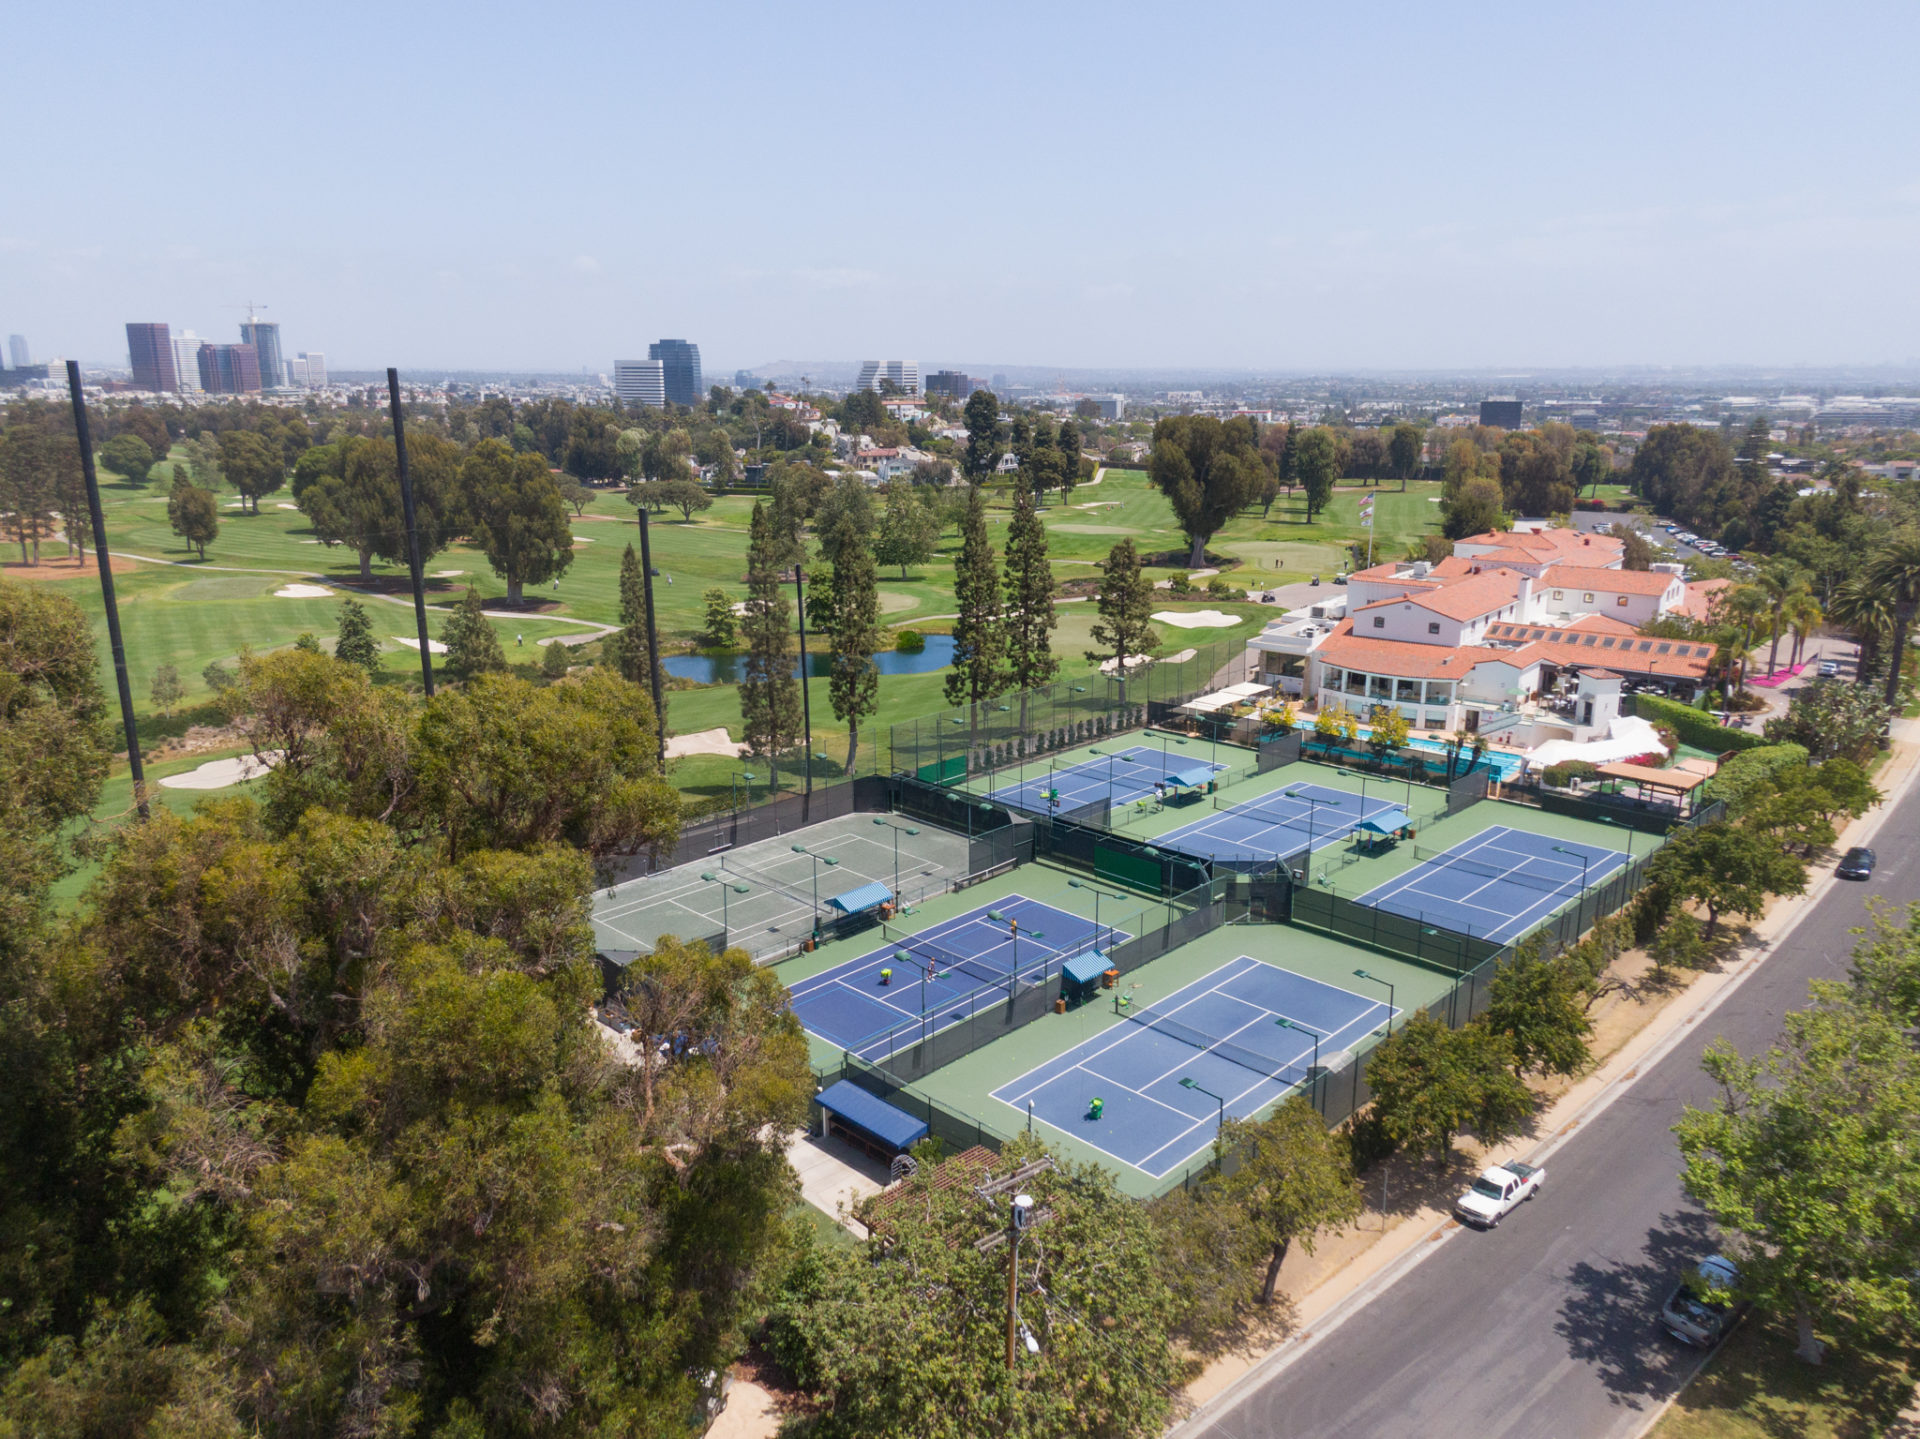 Brentwood Tennis courts and golf course